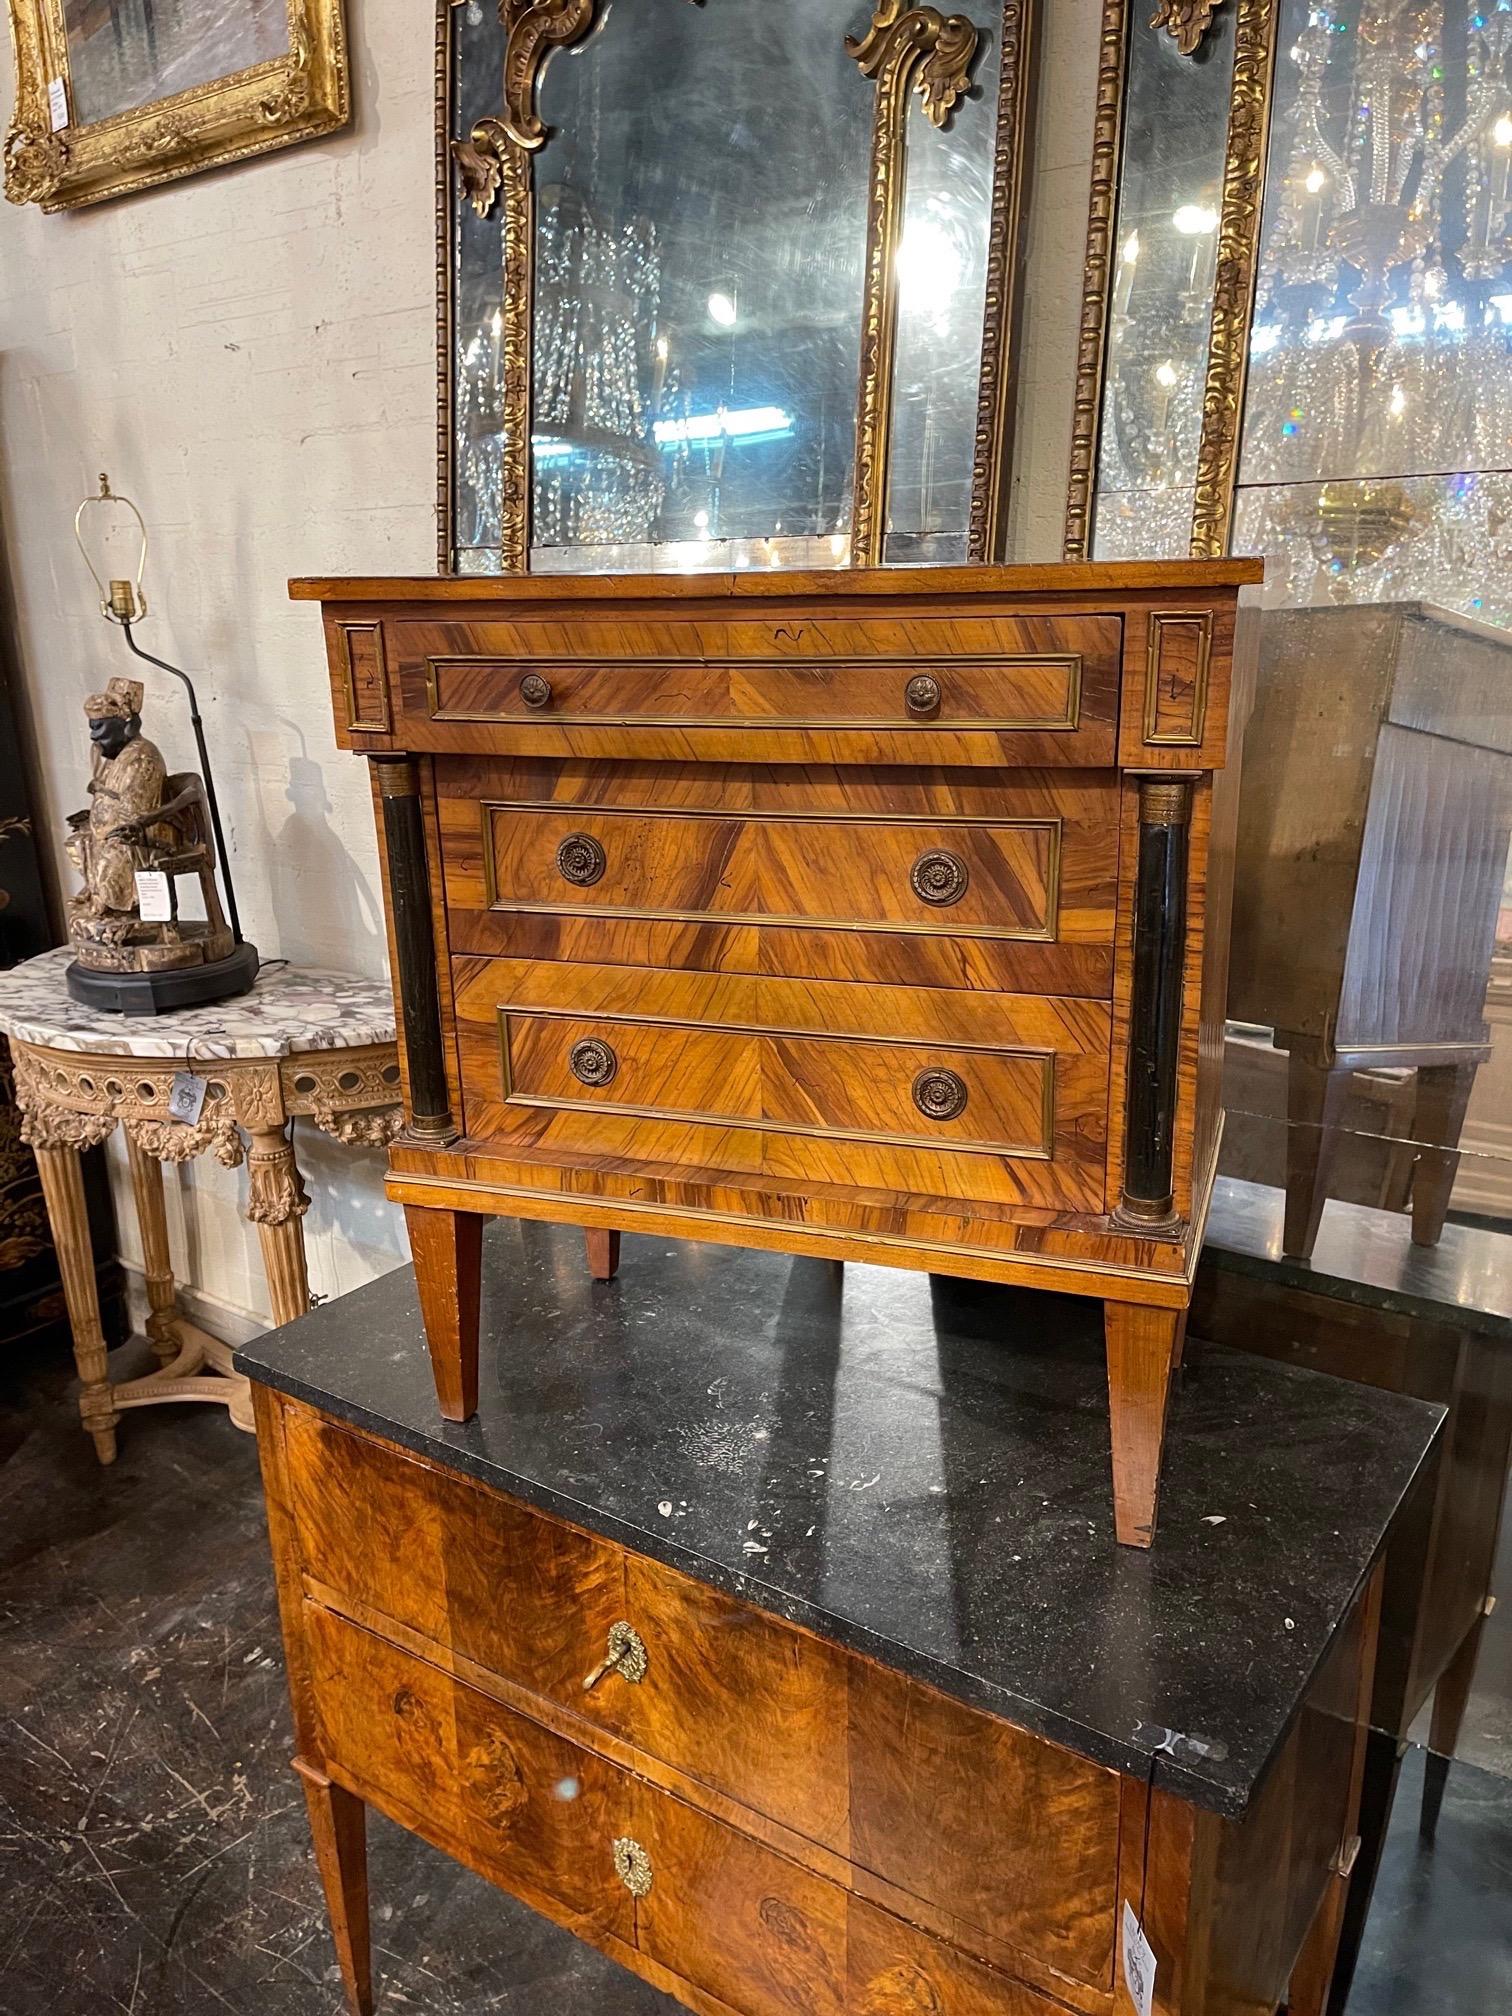 Handsome early 20th century Continental Empire style burl wood side table. Very fine finish on this piece with ebonized details and pretty hardware. An elegant piece!